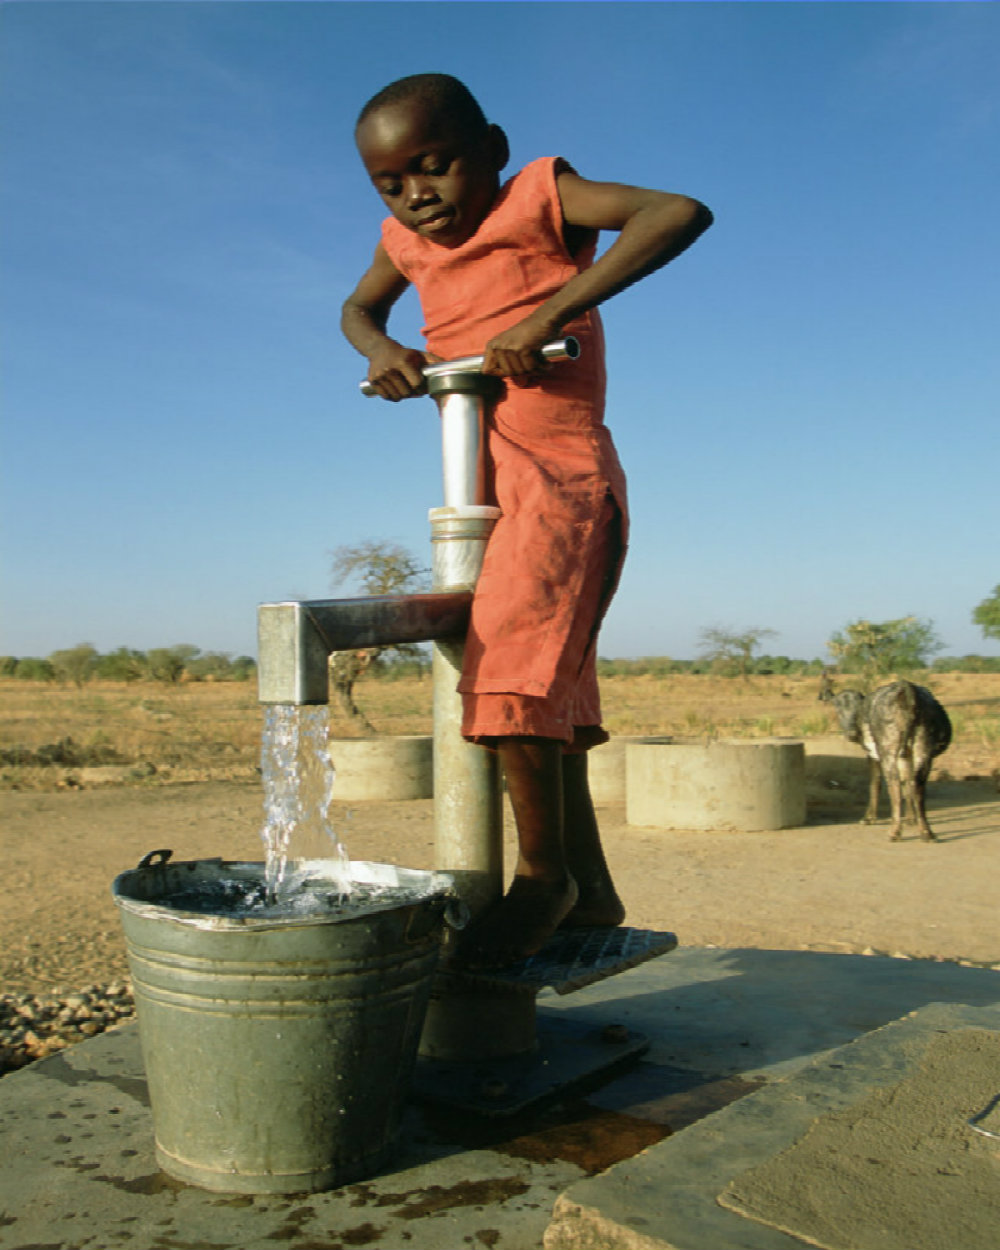 A girl pumps water at a well in northern Ghana. Many children in Africa miss school due to time spent collecting water. Girls are mainly responsible for collecting water for their families
